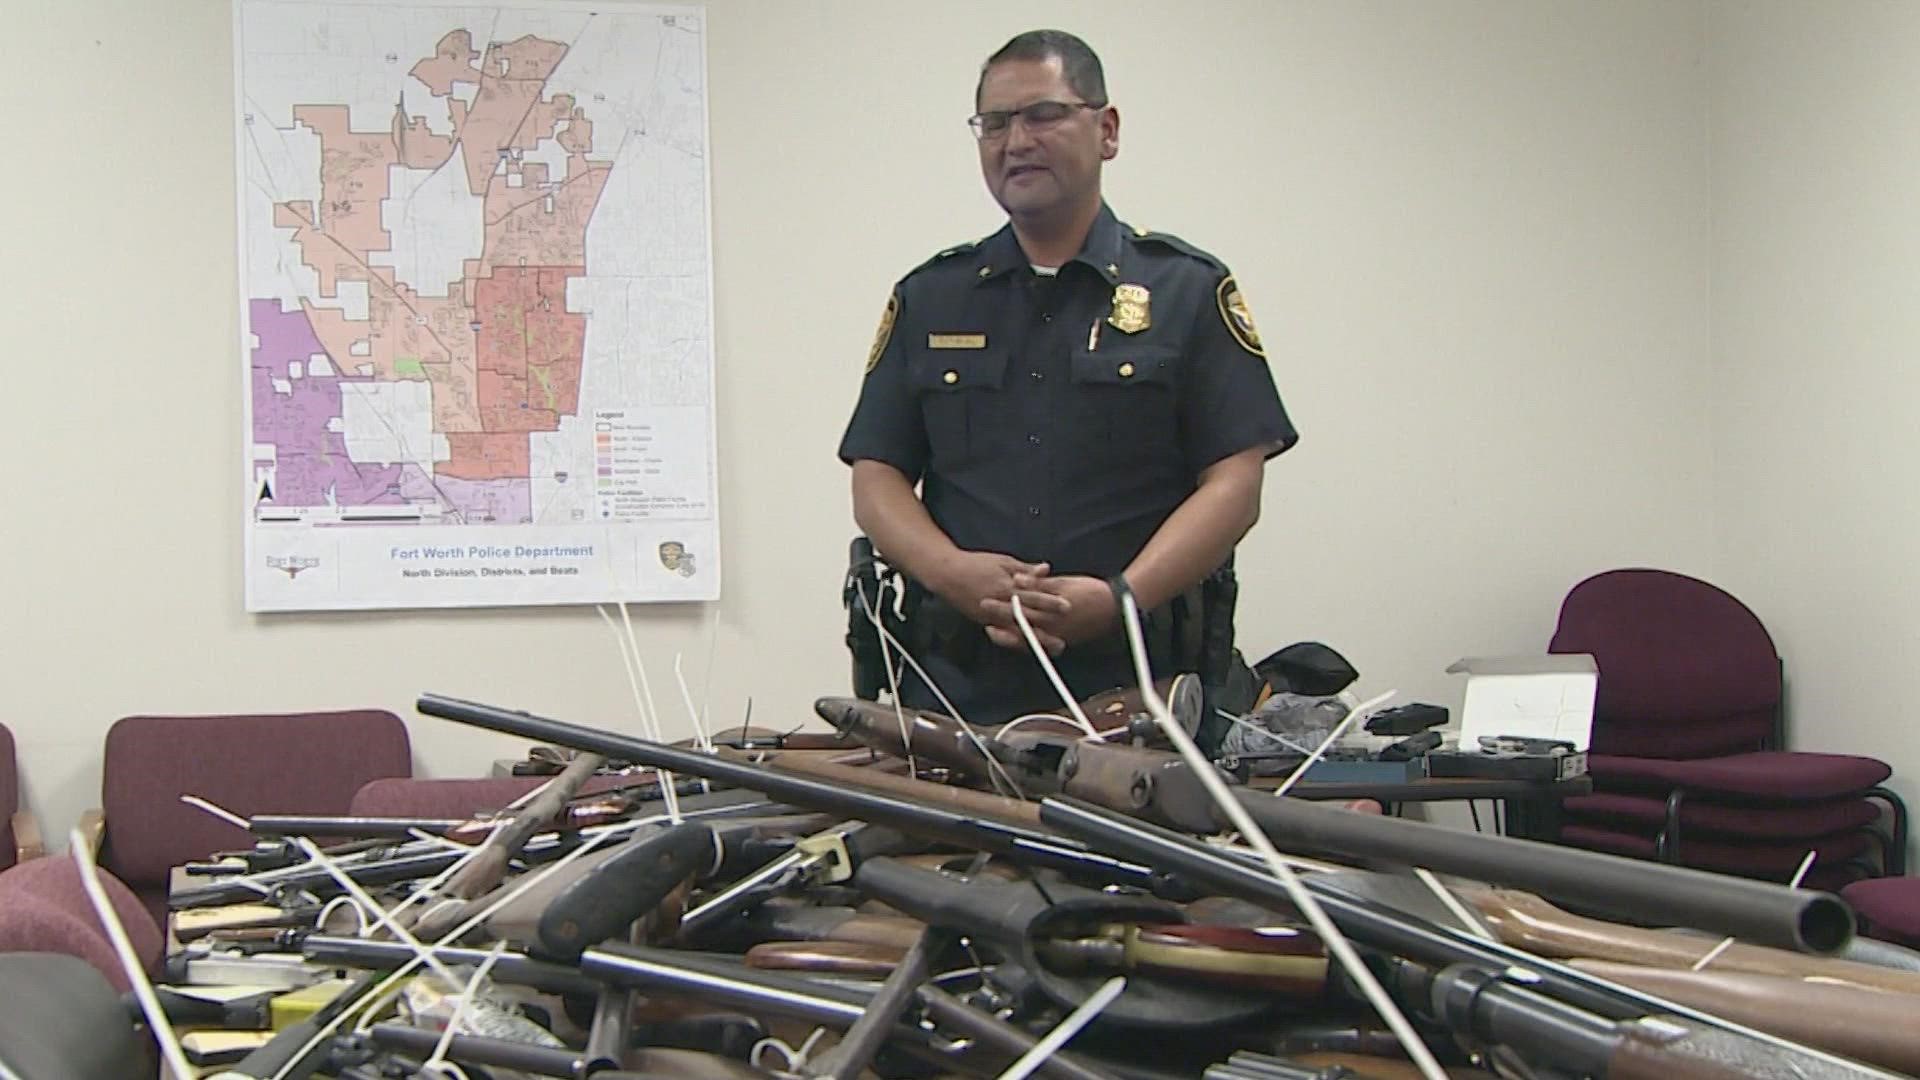 One of the department's goals is to keep weapons out of the wrong hands.